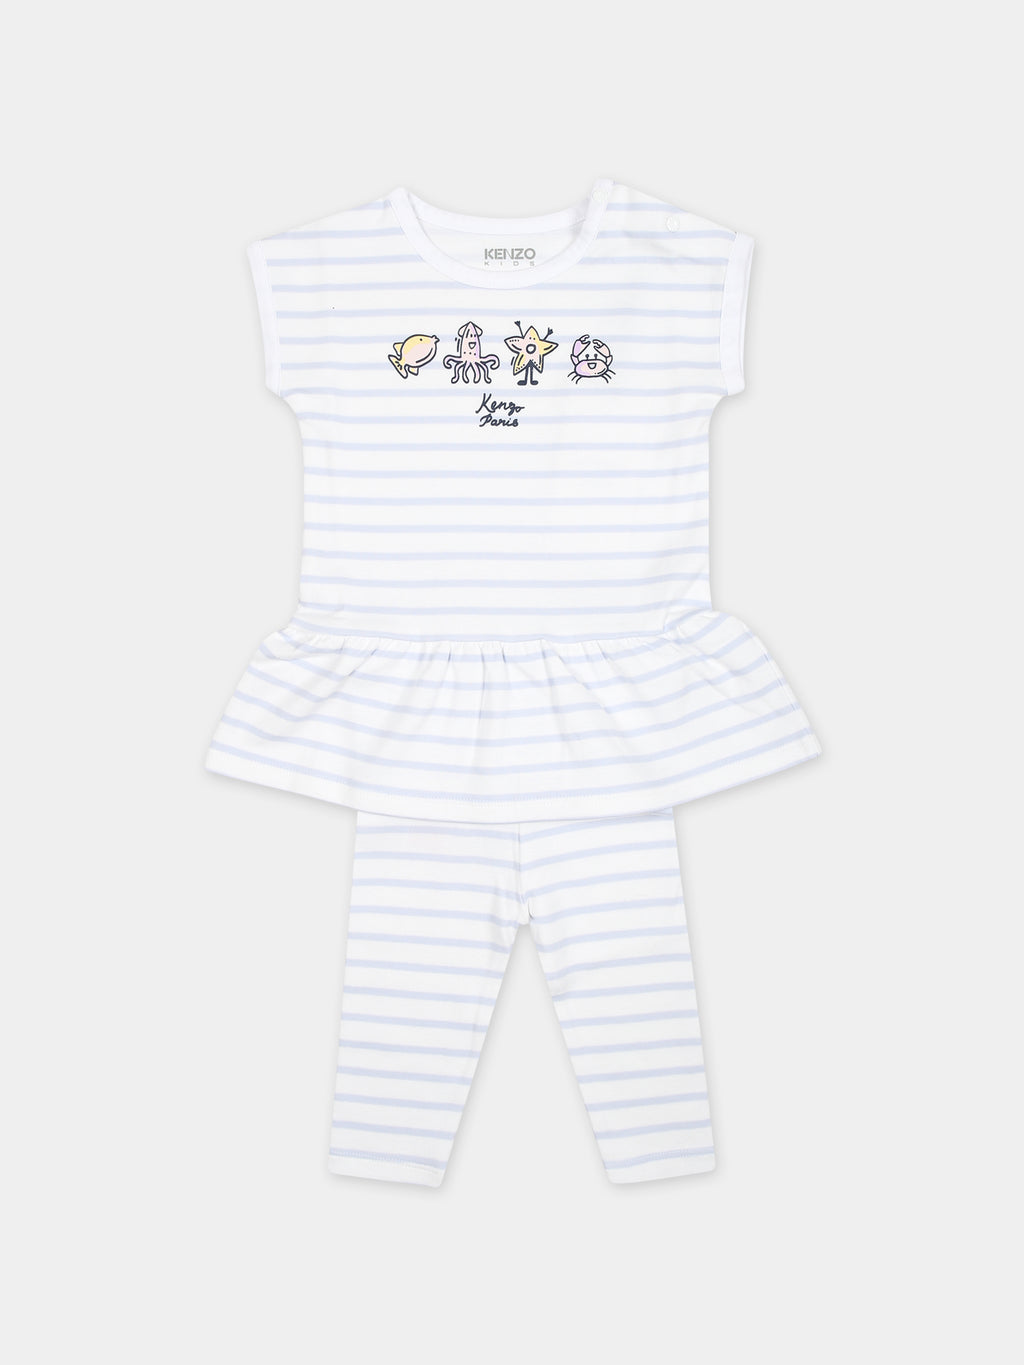 White sports suit for baby girl with marine animals